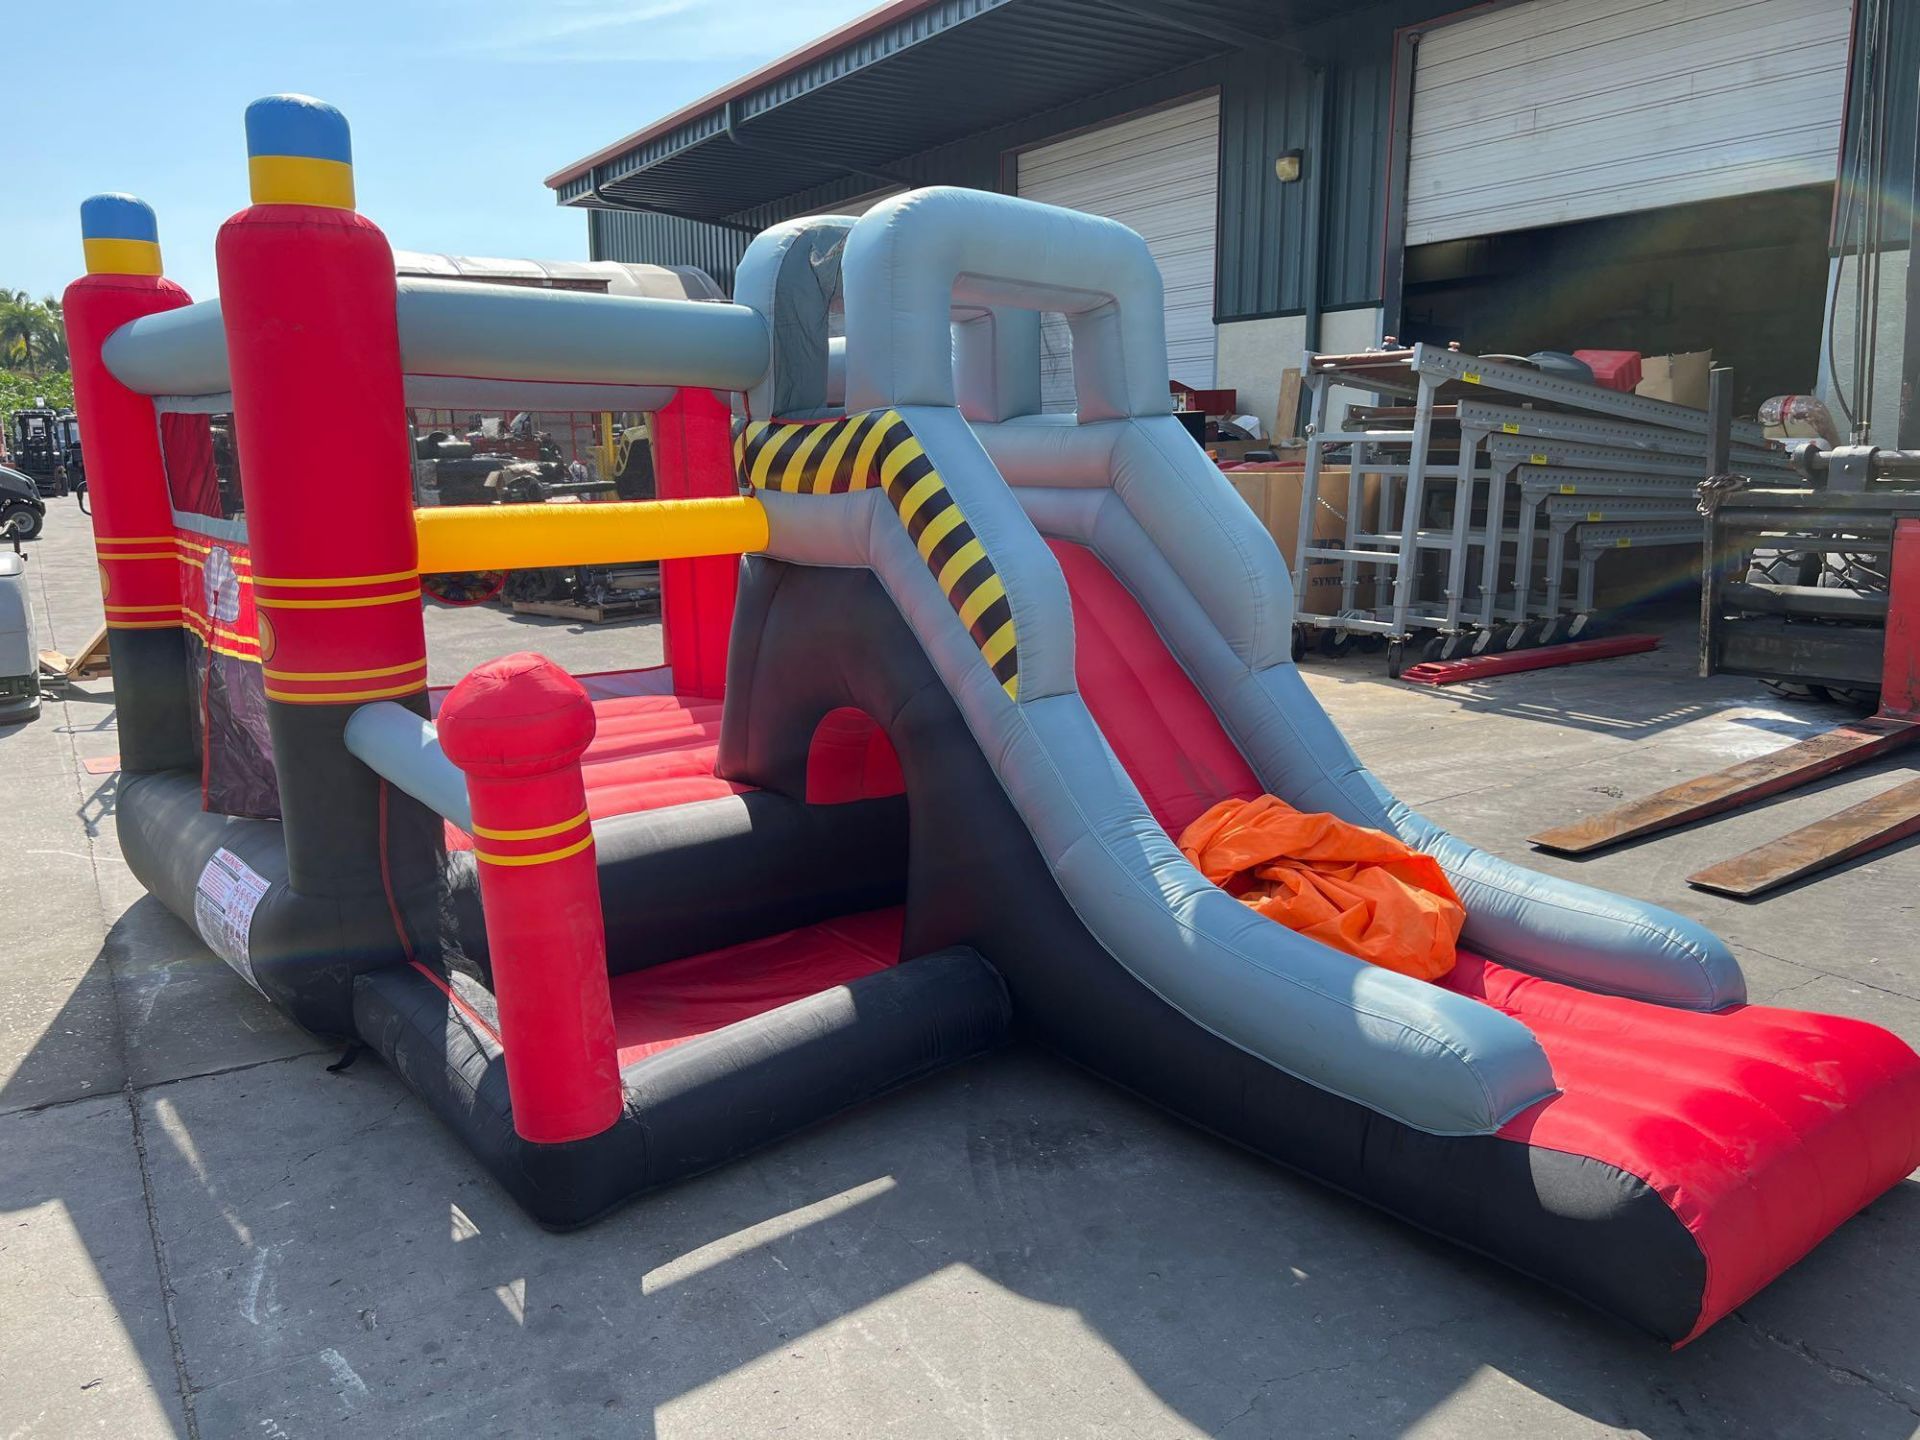 UNUSED BLOW-UP BOUNCY FIRE STATION PLAY YARD WITH SLIDE, VELCRO DARTS, BALLS, STAKES, & BLOWER